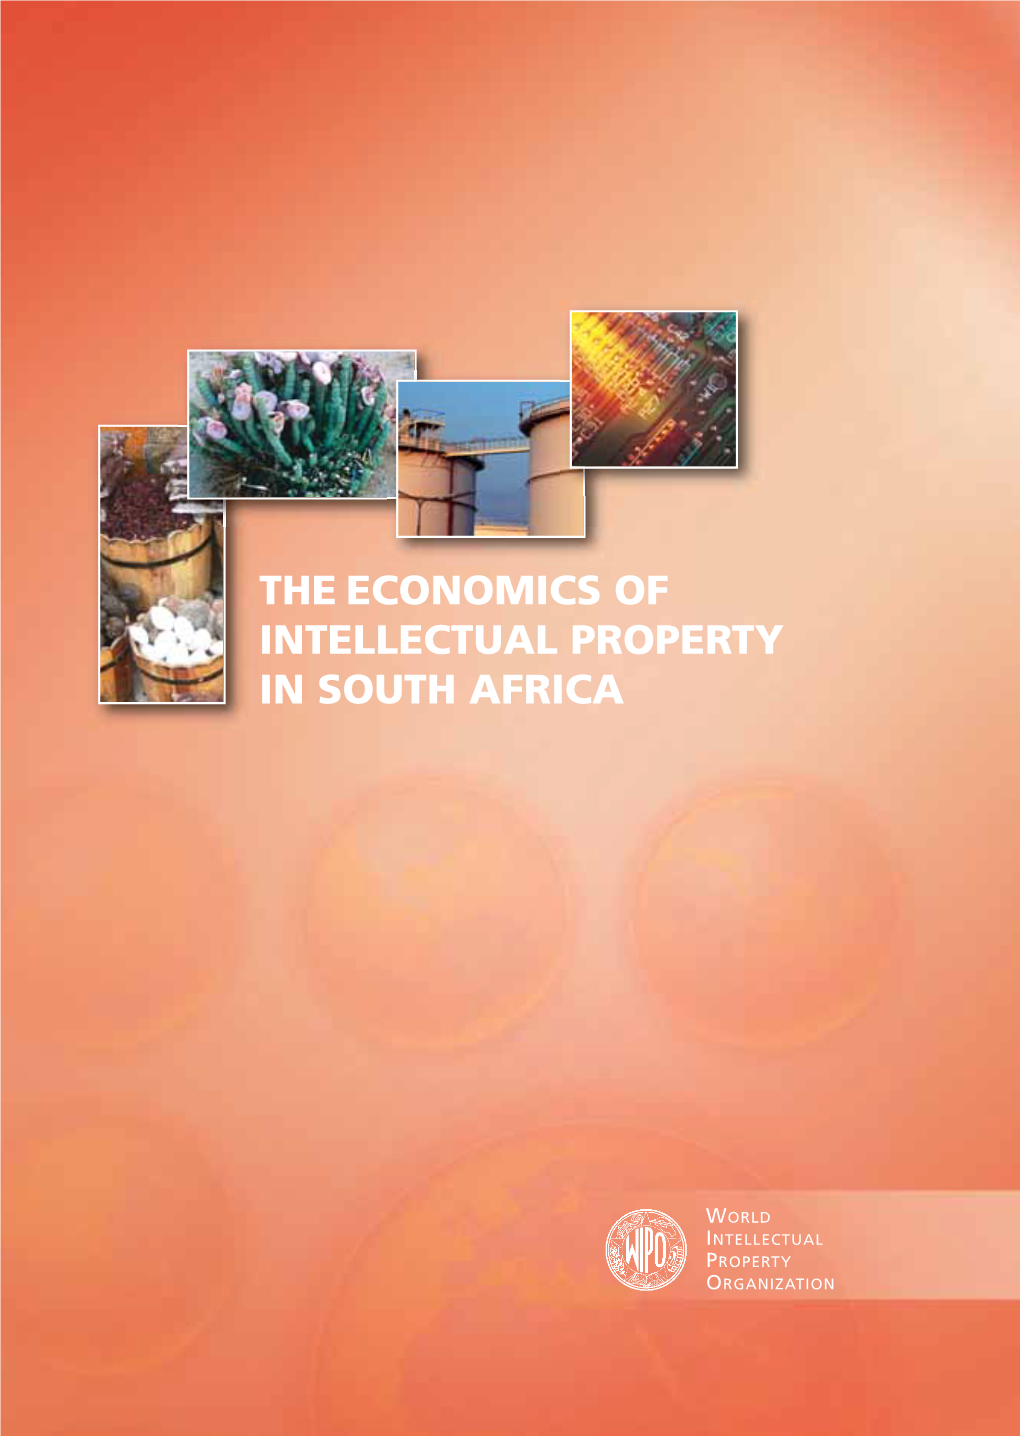 The Economics of Intellectual Property in South Africa